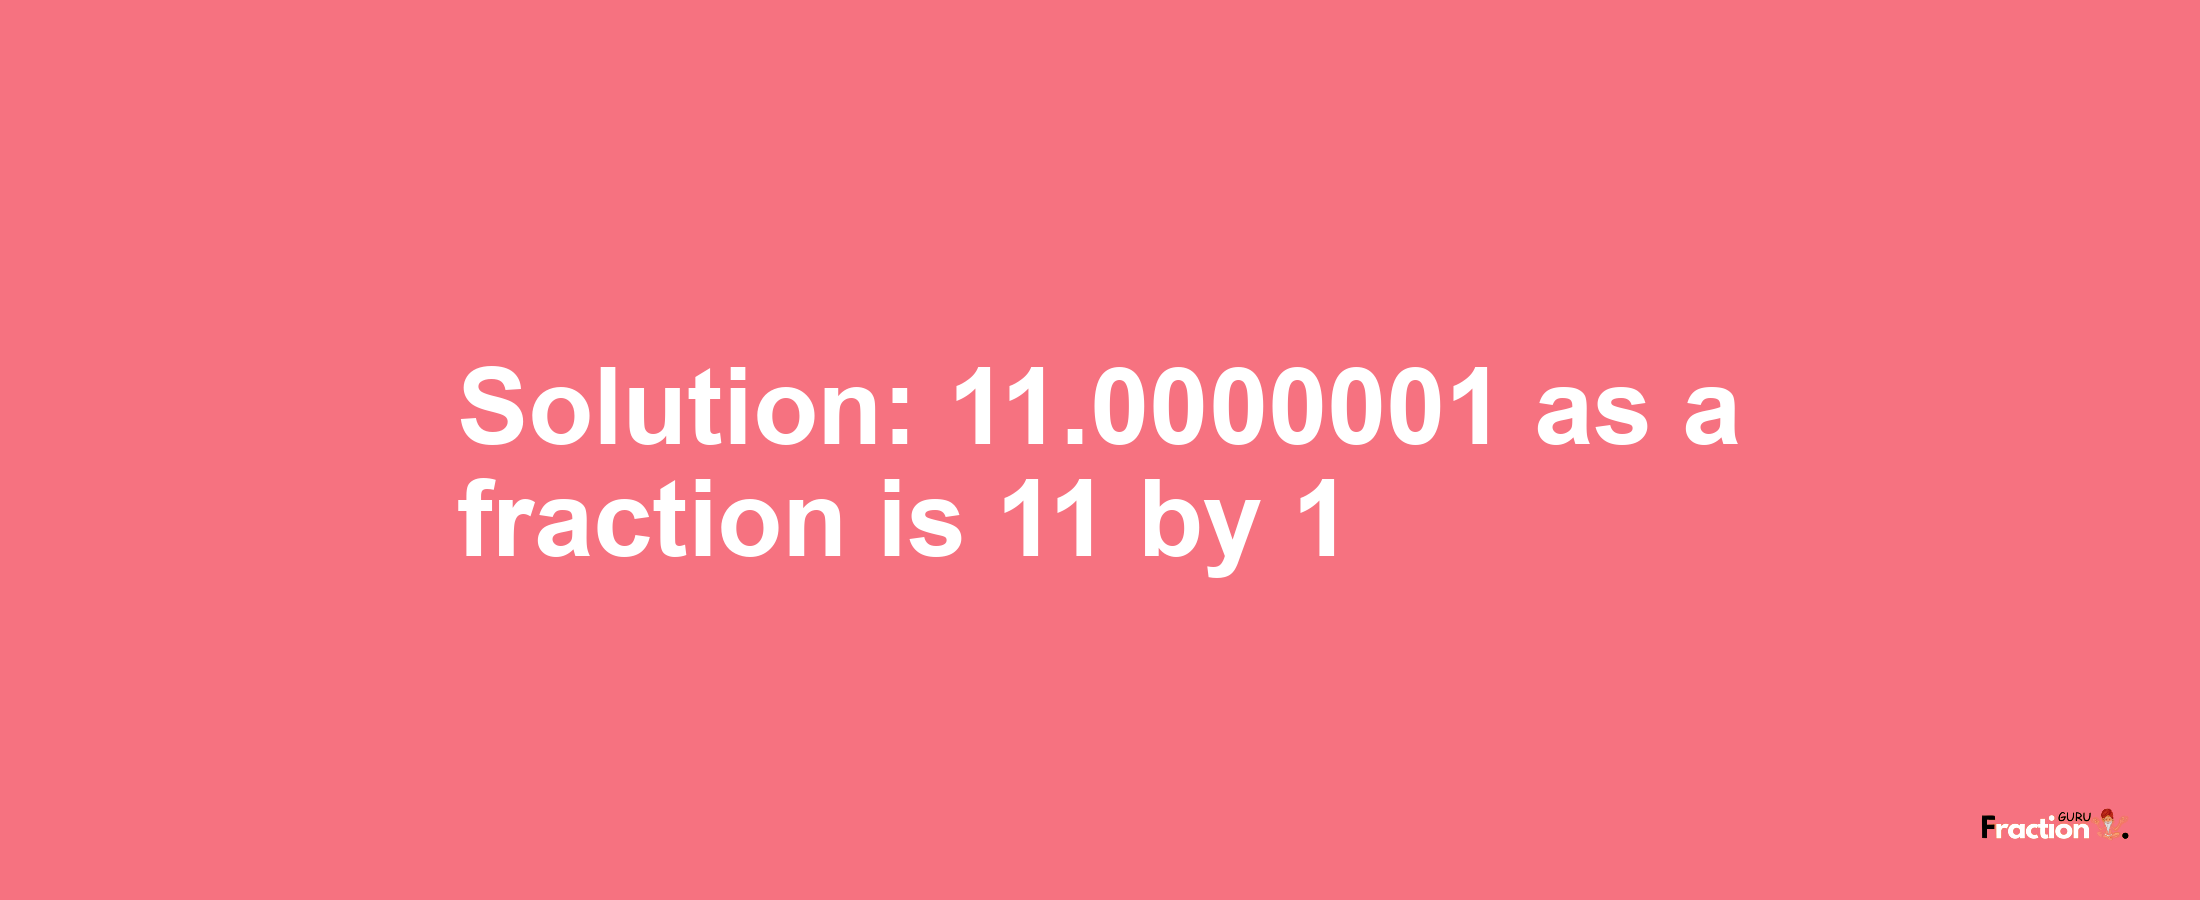 Solution:11.0000001 as a fraction is 11/1